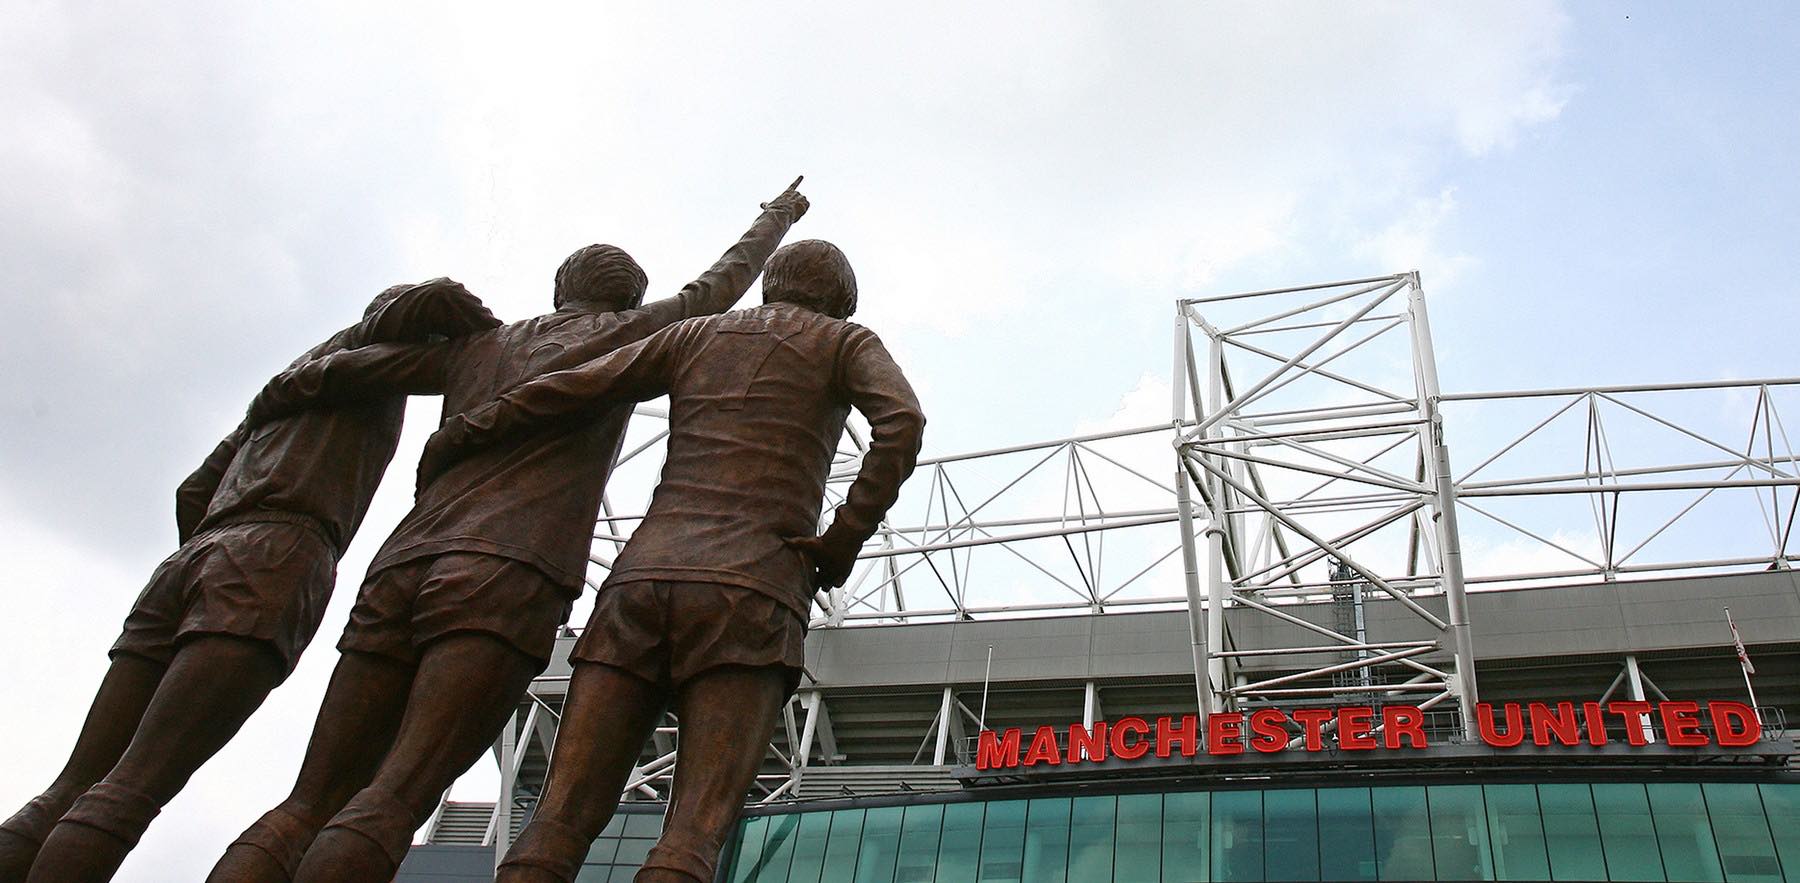 The bronze statue of the 'Busby Babes' features George Best, Dennis Law and Bobby Charlton